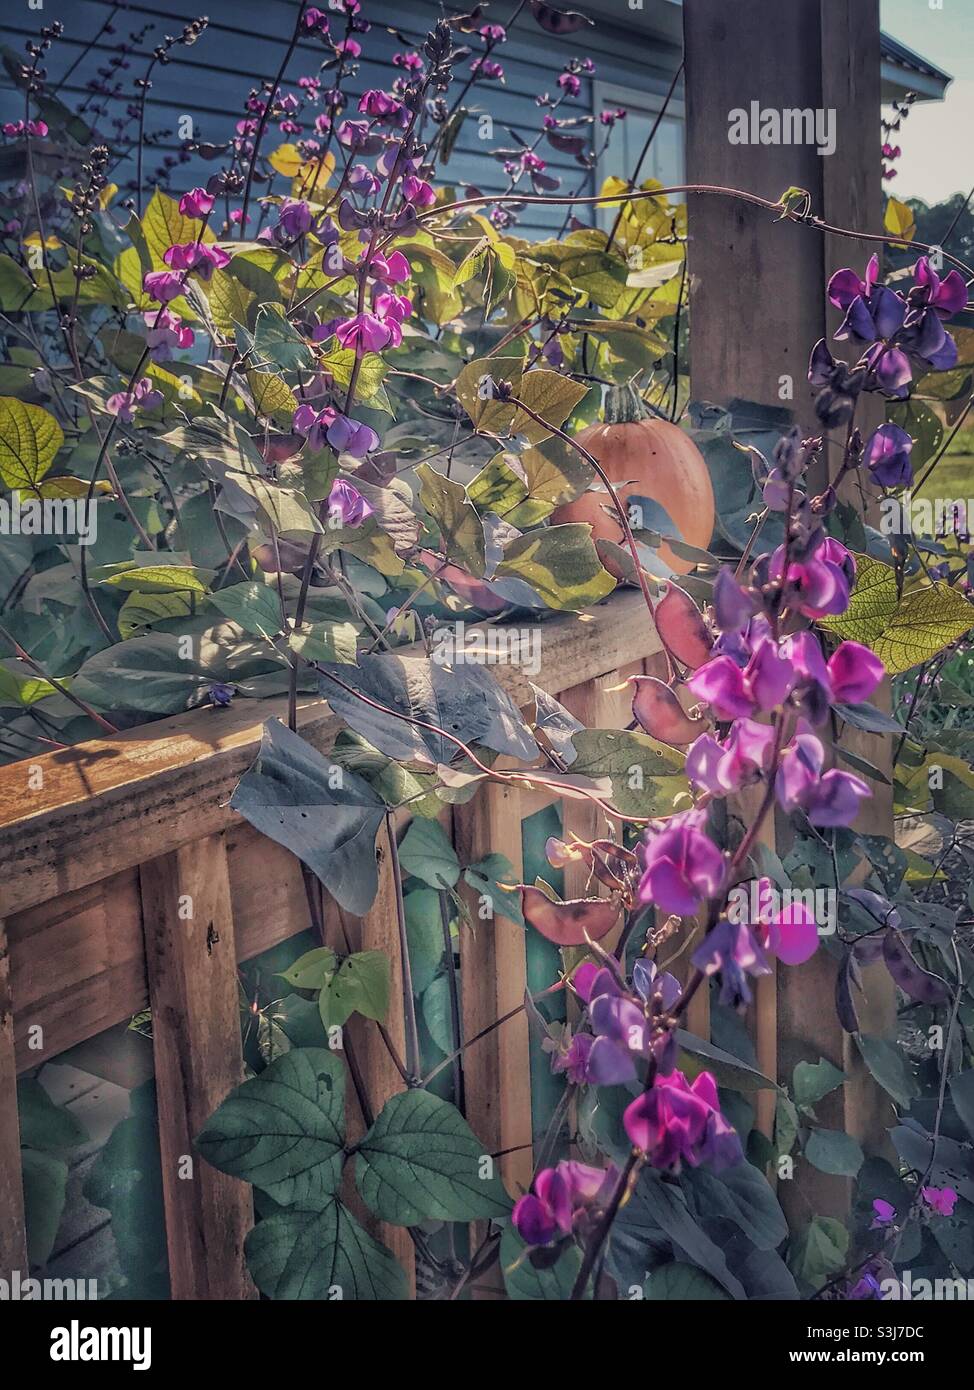 Early Autumn photo of a homegrown orange pumpkin on a porch railing, surrounded by purple Hyacinth Bean vines and blossoms Stock Photo